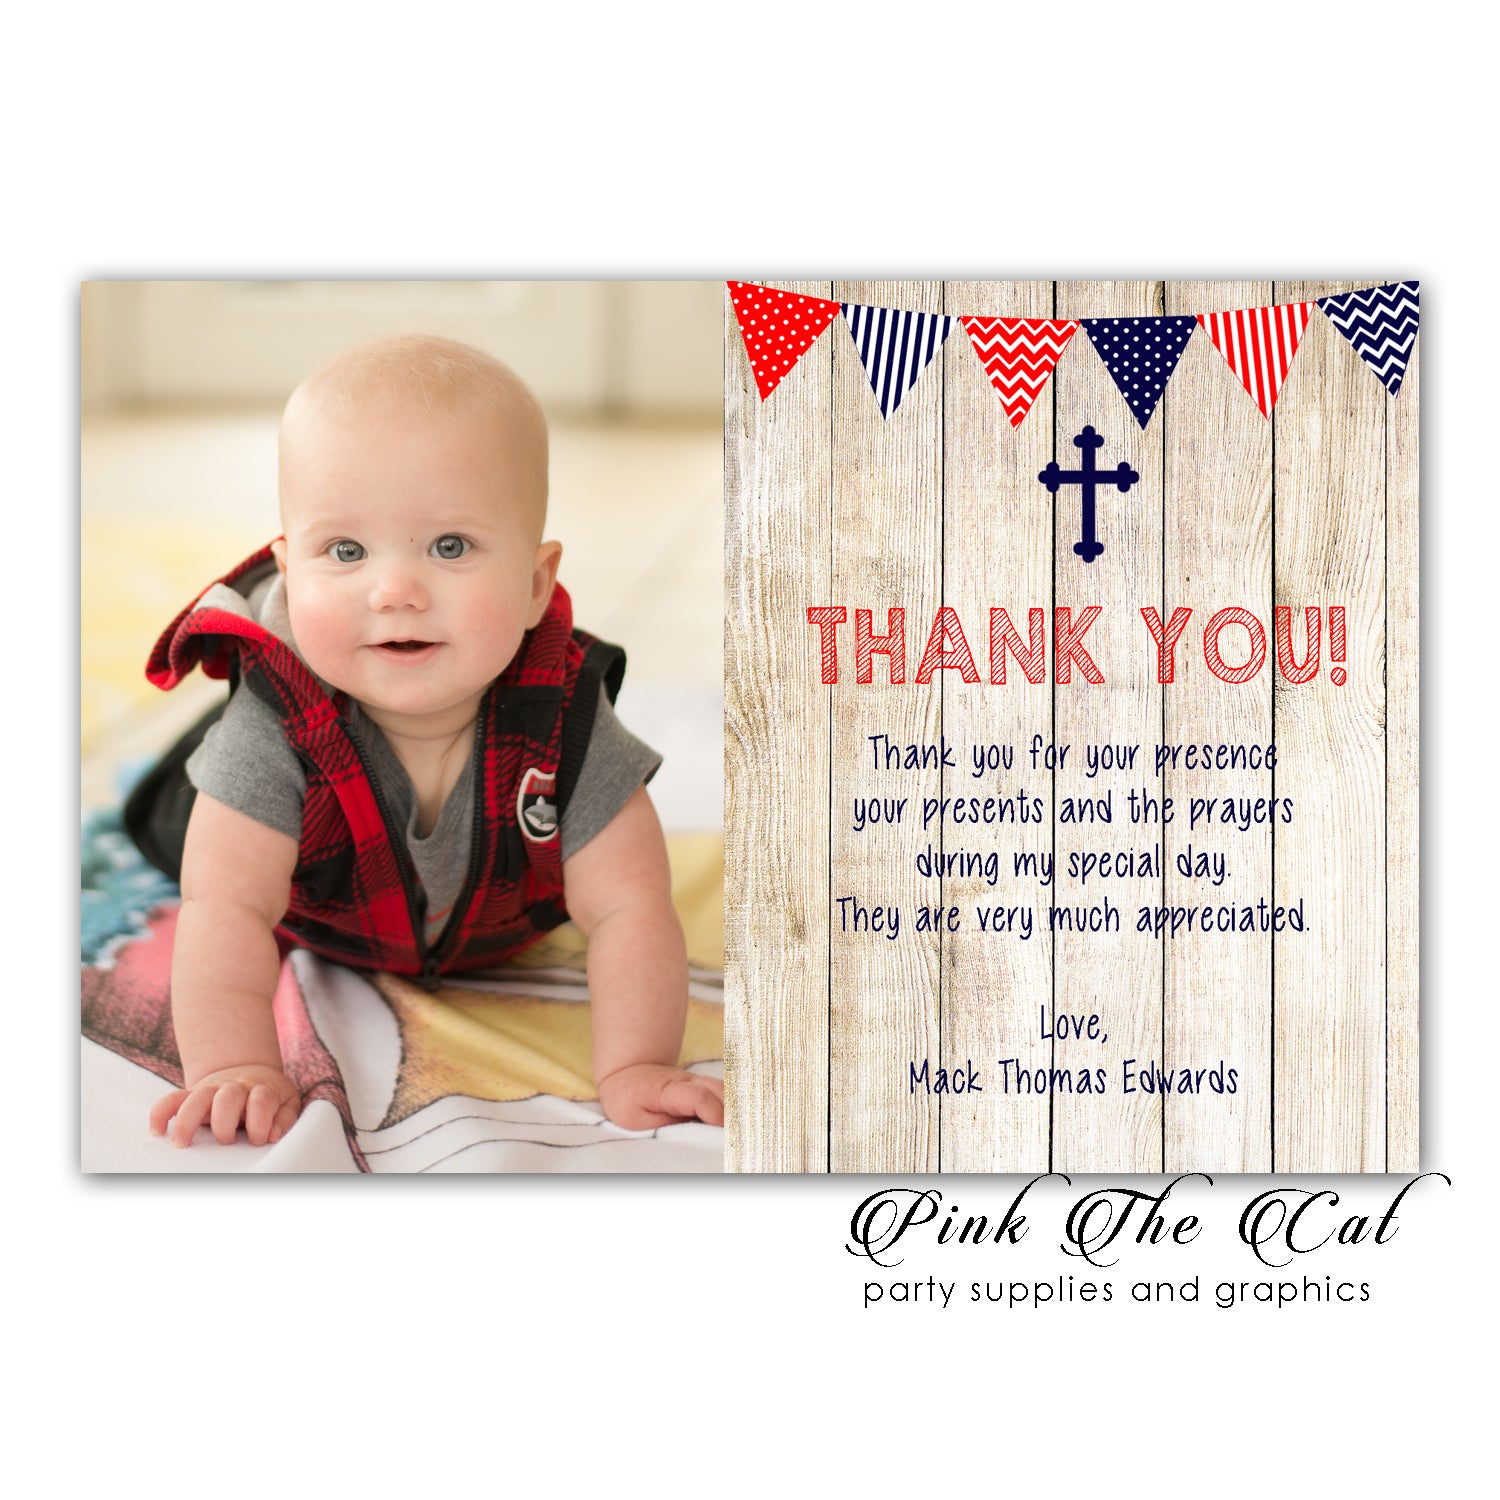 Rustic thank you cards blue red (set of 30)